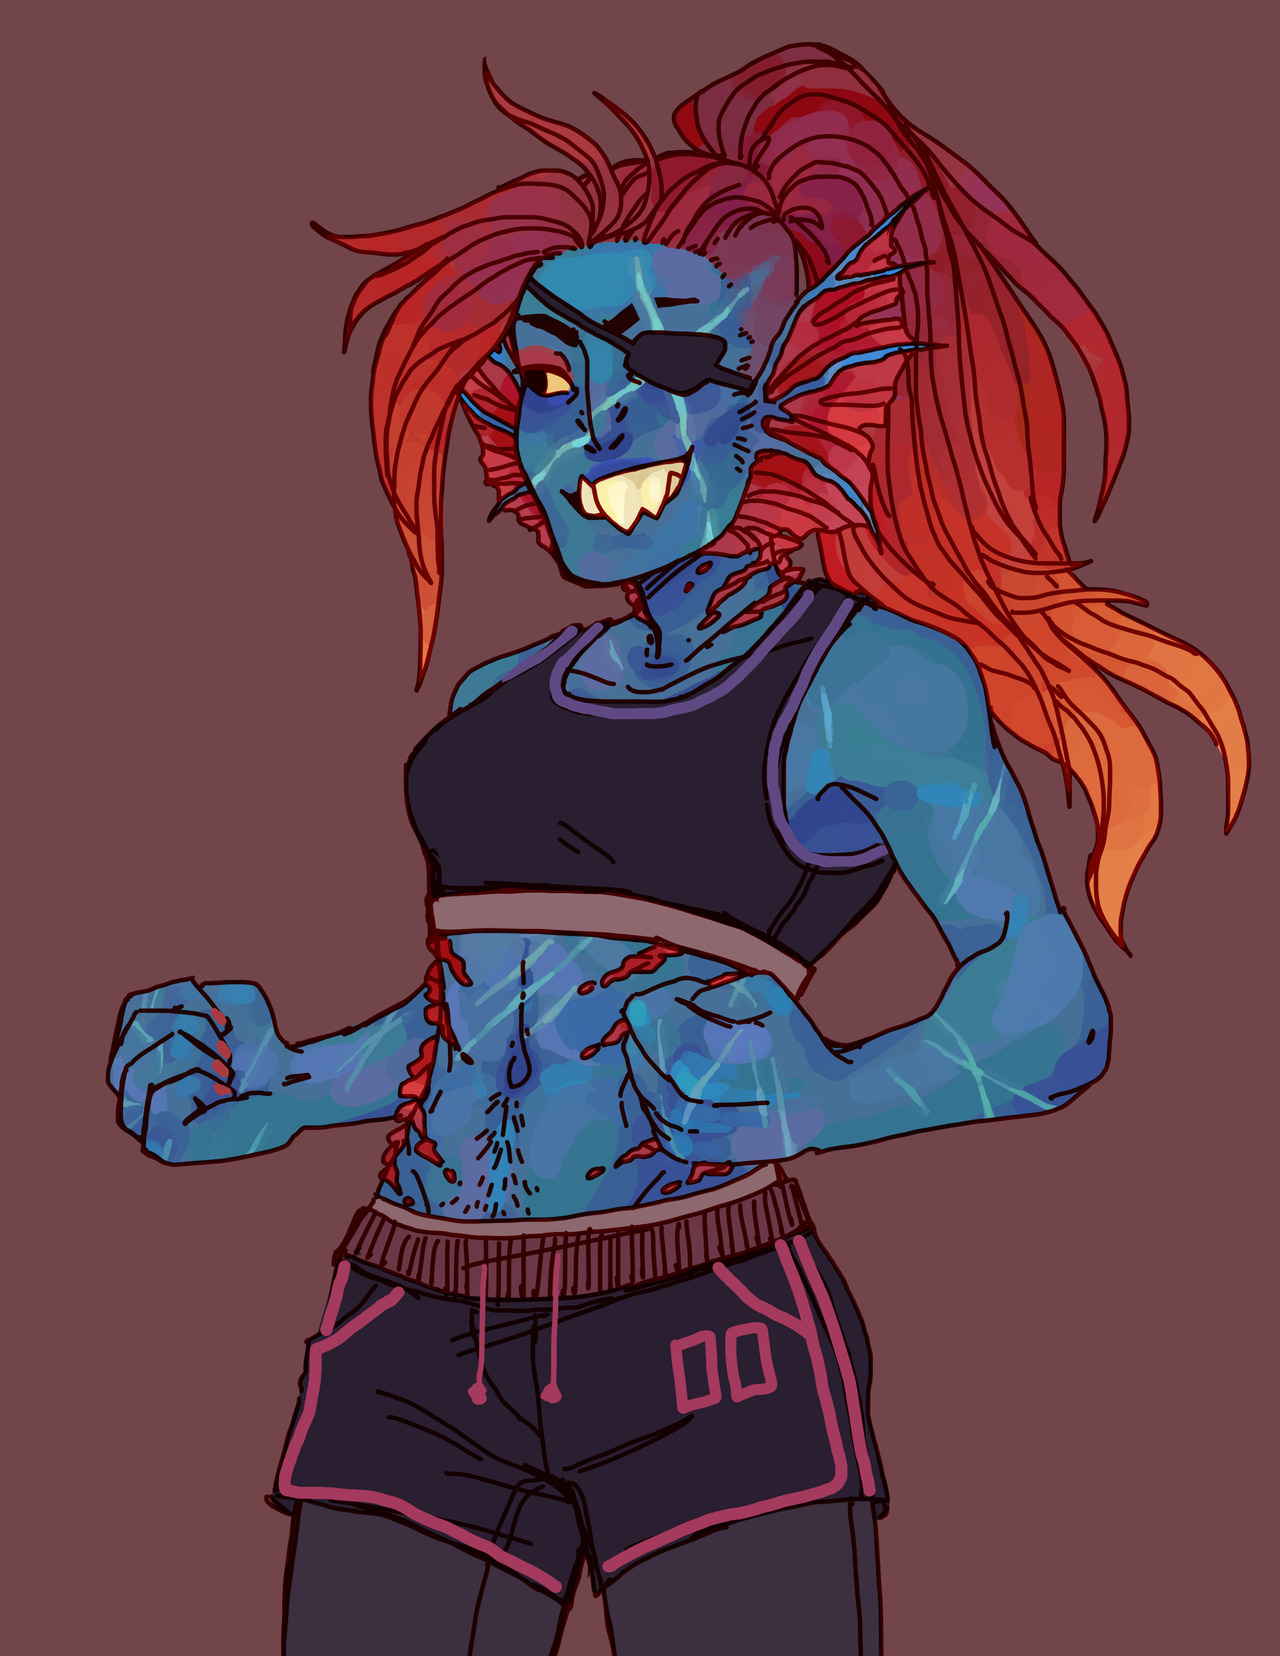 VK. really felt like drawing another undyne for the past week and i finally...